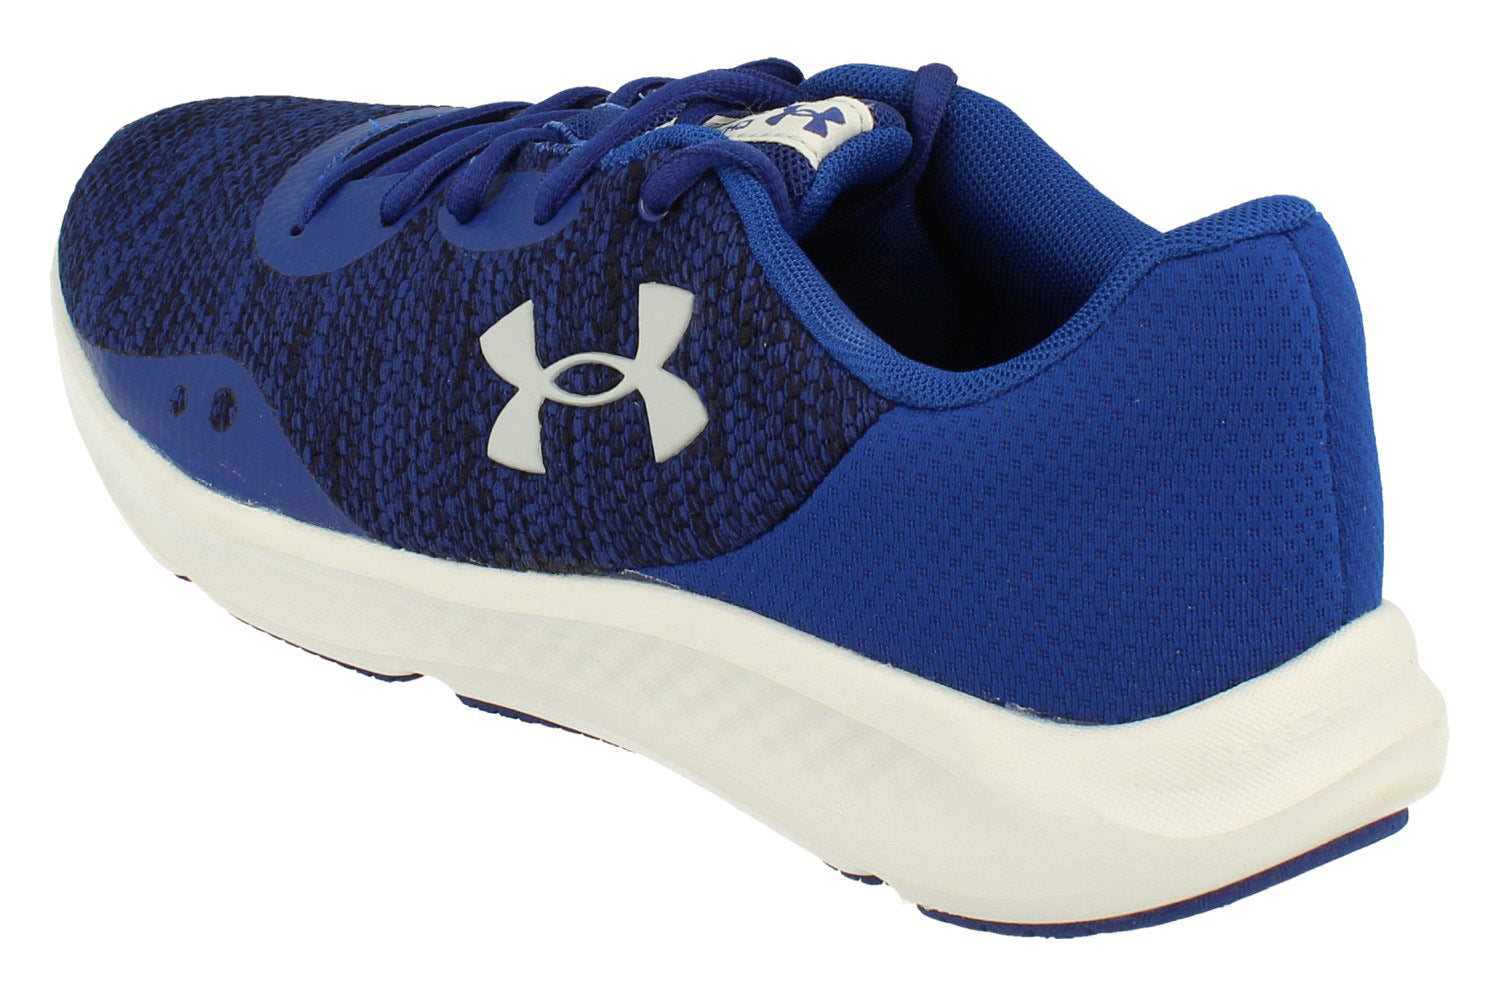 Under Armour Women's Charged Pursuit 3 Twist Running Shoe, (100